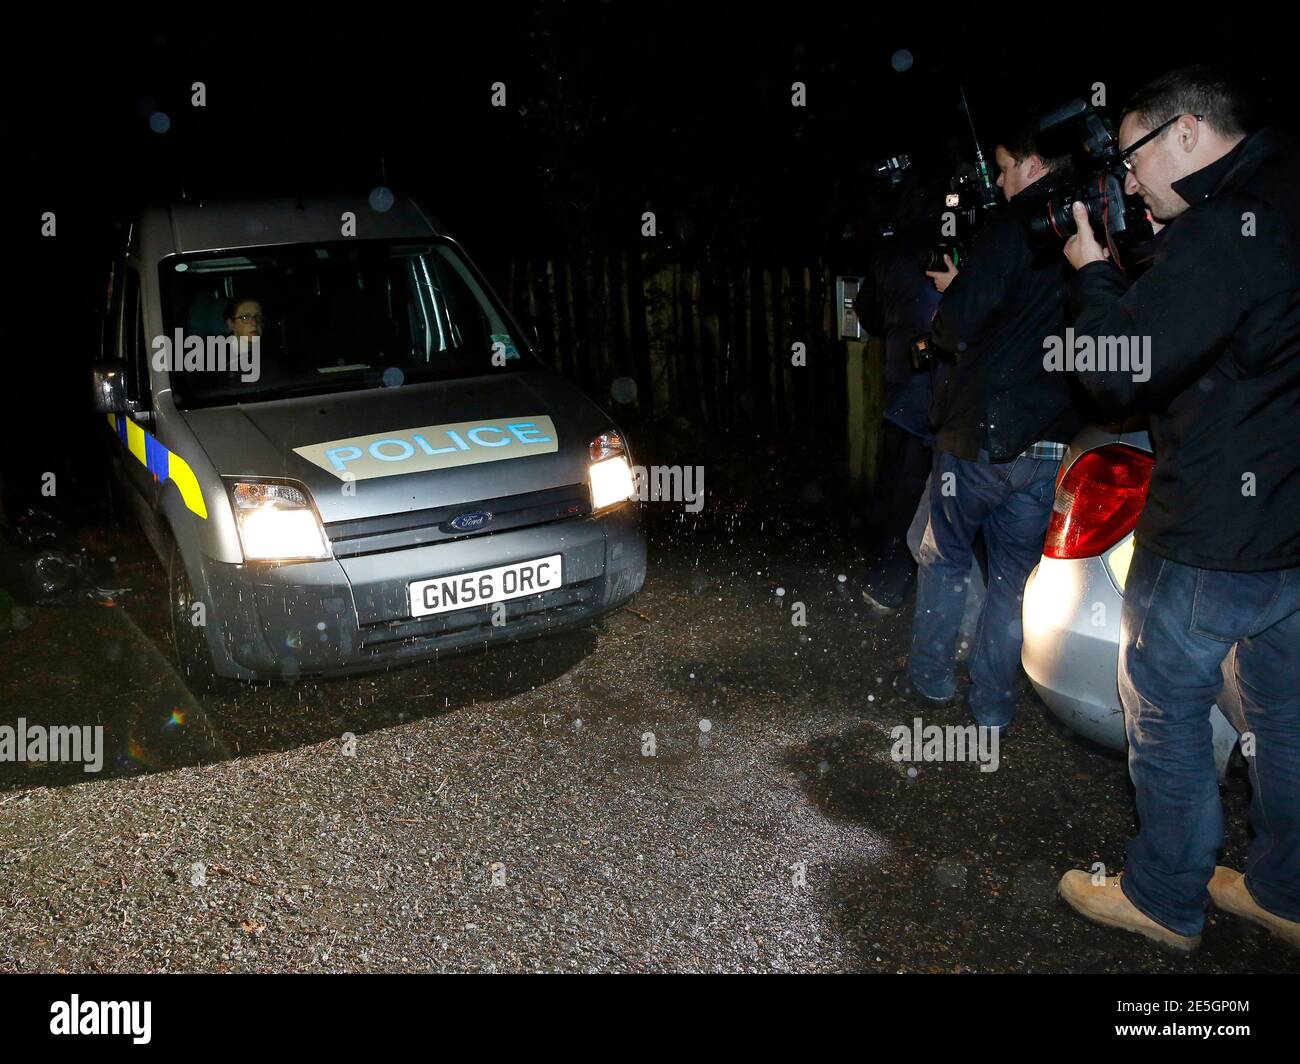 A police van is photographed leaving the house of Peaches Geldof after she was found dead at her home in Kent April 7, 2014. Geldof, second daughter of Band Aid founder and musician Bob Geldof and a media and fashion personality in her own right, has died at her home in Kent, southern England, aged 25, her family said on Monday. Kent police issued a statement saying the death of a 25-year-old woman, whom they did not identify, was being treated as a 'non-suspicious but unexplained sudden death'.  REUTERS/Olivia Harris (BRITAIN - Tags: SOCIETY ENTERTAINMENT) Stock Photo